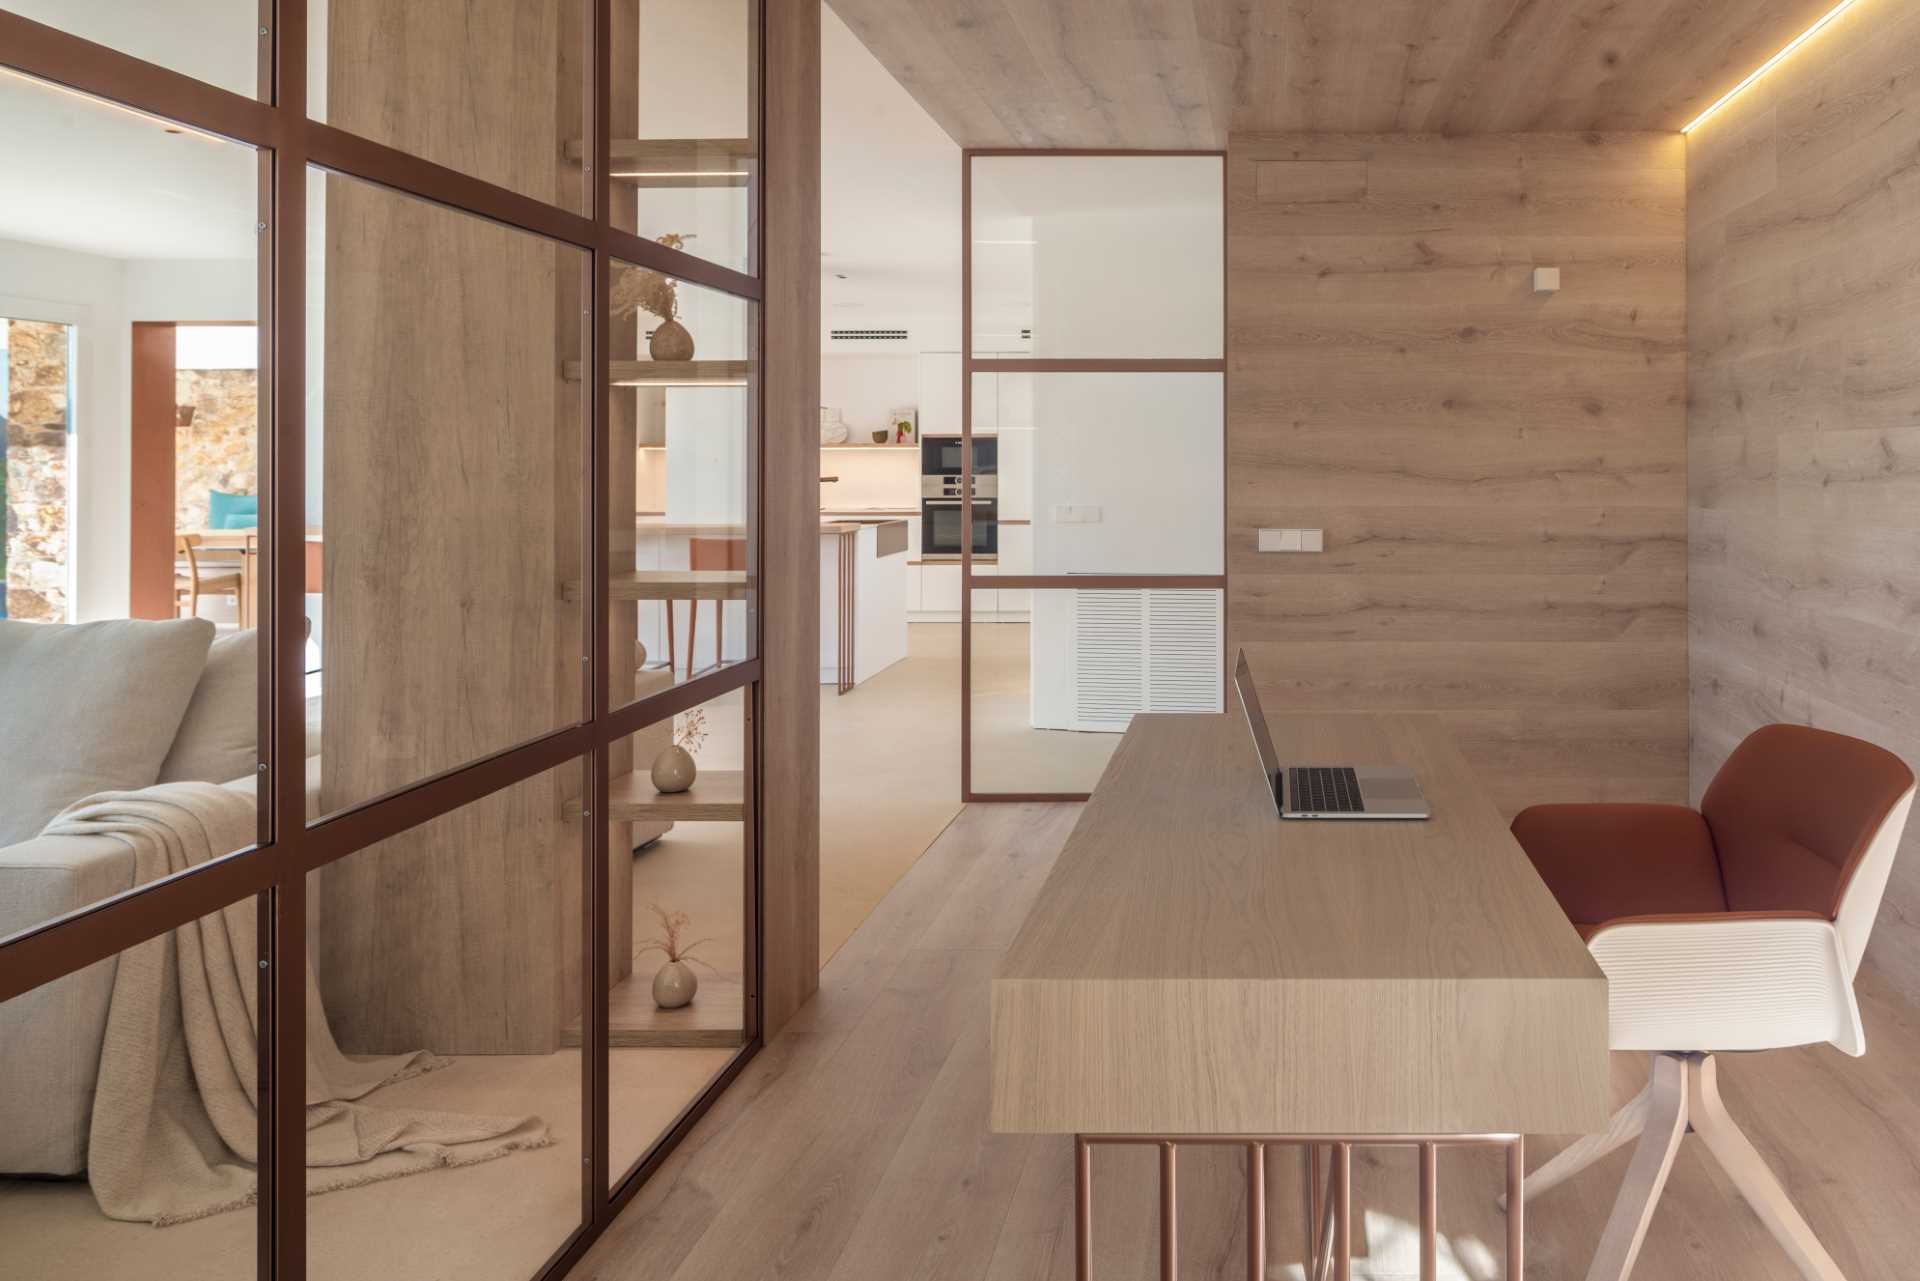 A modern home office lined with oak floors, walls, and ceilings, also includes copper-framed glass walls.